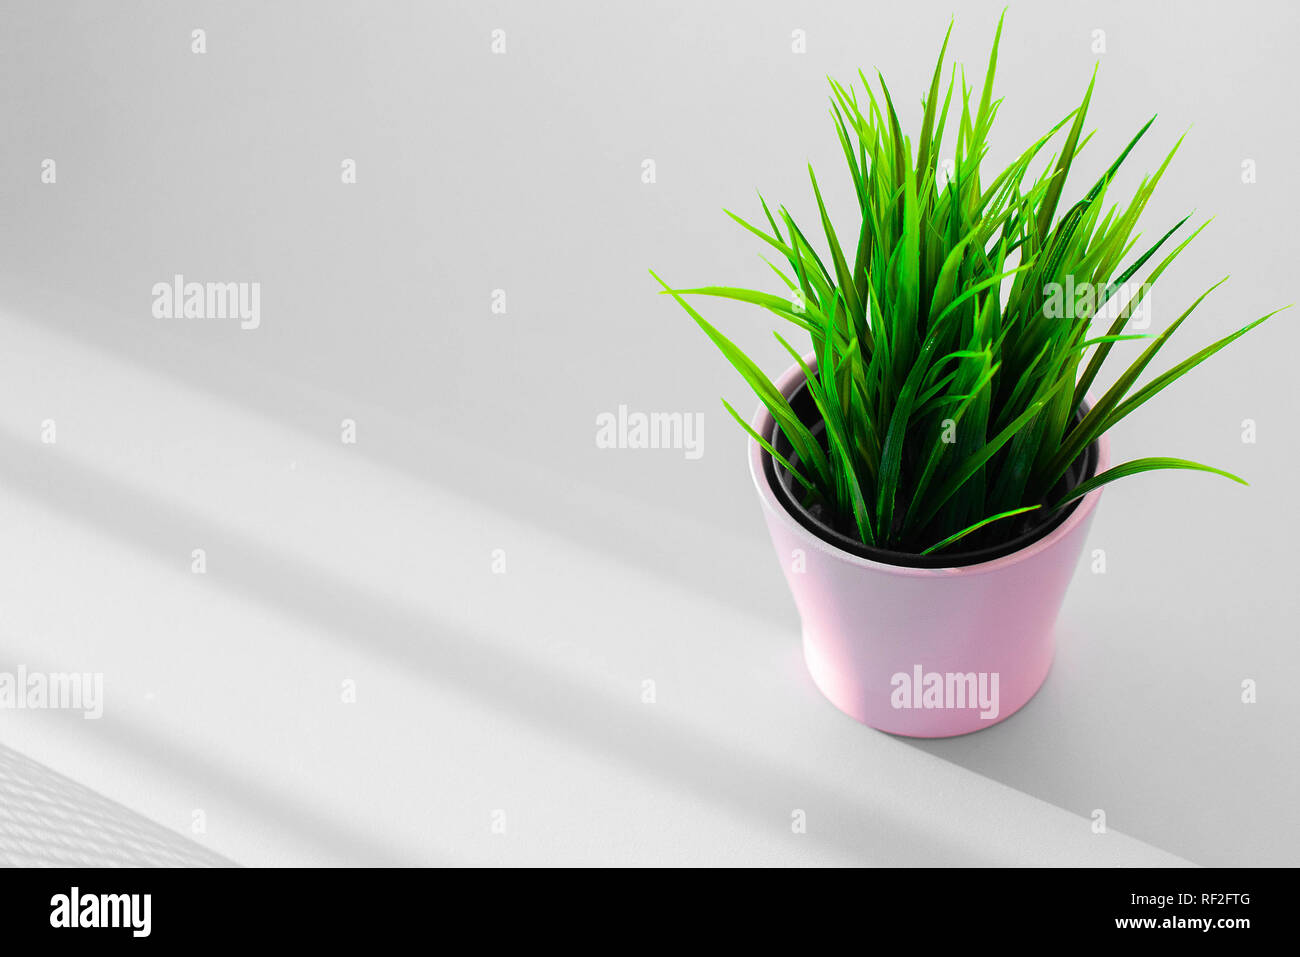 Pink pot with green juicy grass on the gray background. Stock Photo